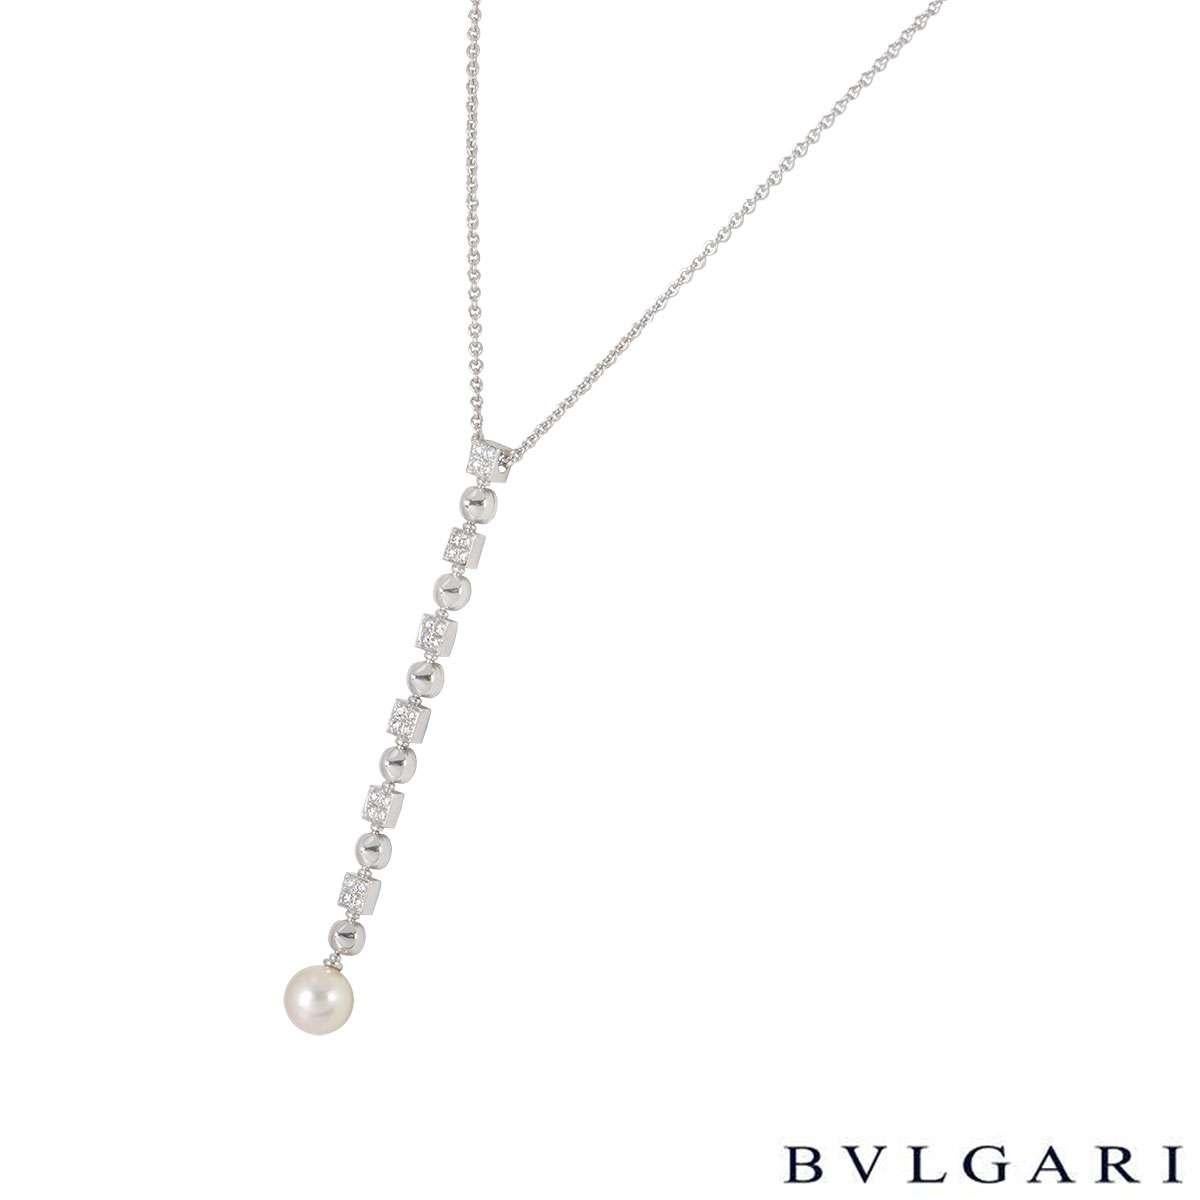 A beautiful 18k white gold diamond and pearl pendant from the Lucea collection by Bvlgari. The pendant is composed of 6 diamond set square links interlinked with 6 white gold spherical links, complemented by a single pearl suspended at the bottom.